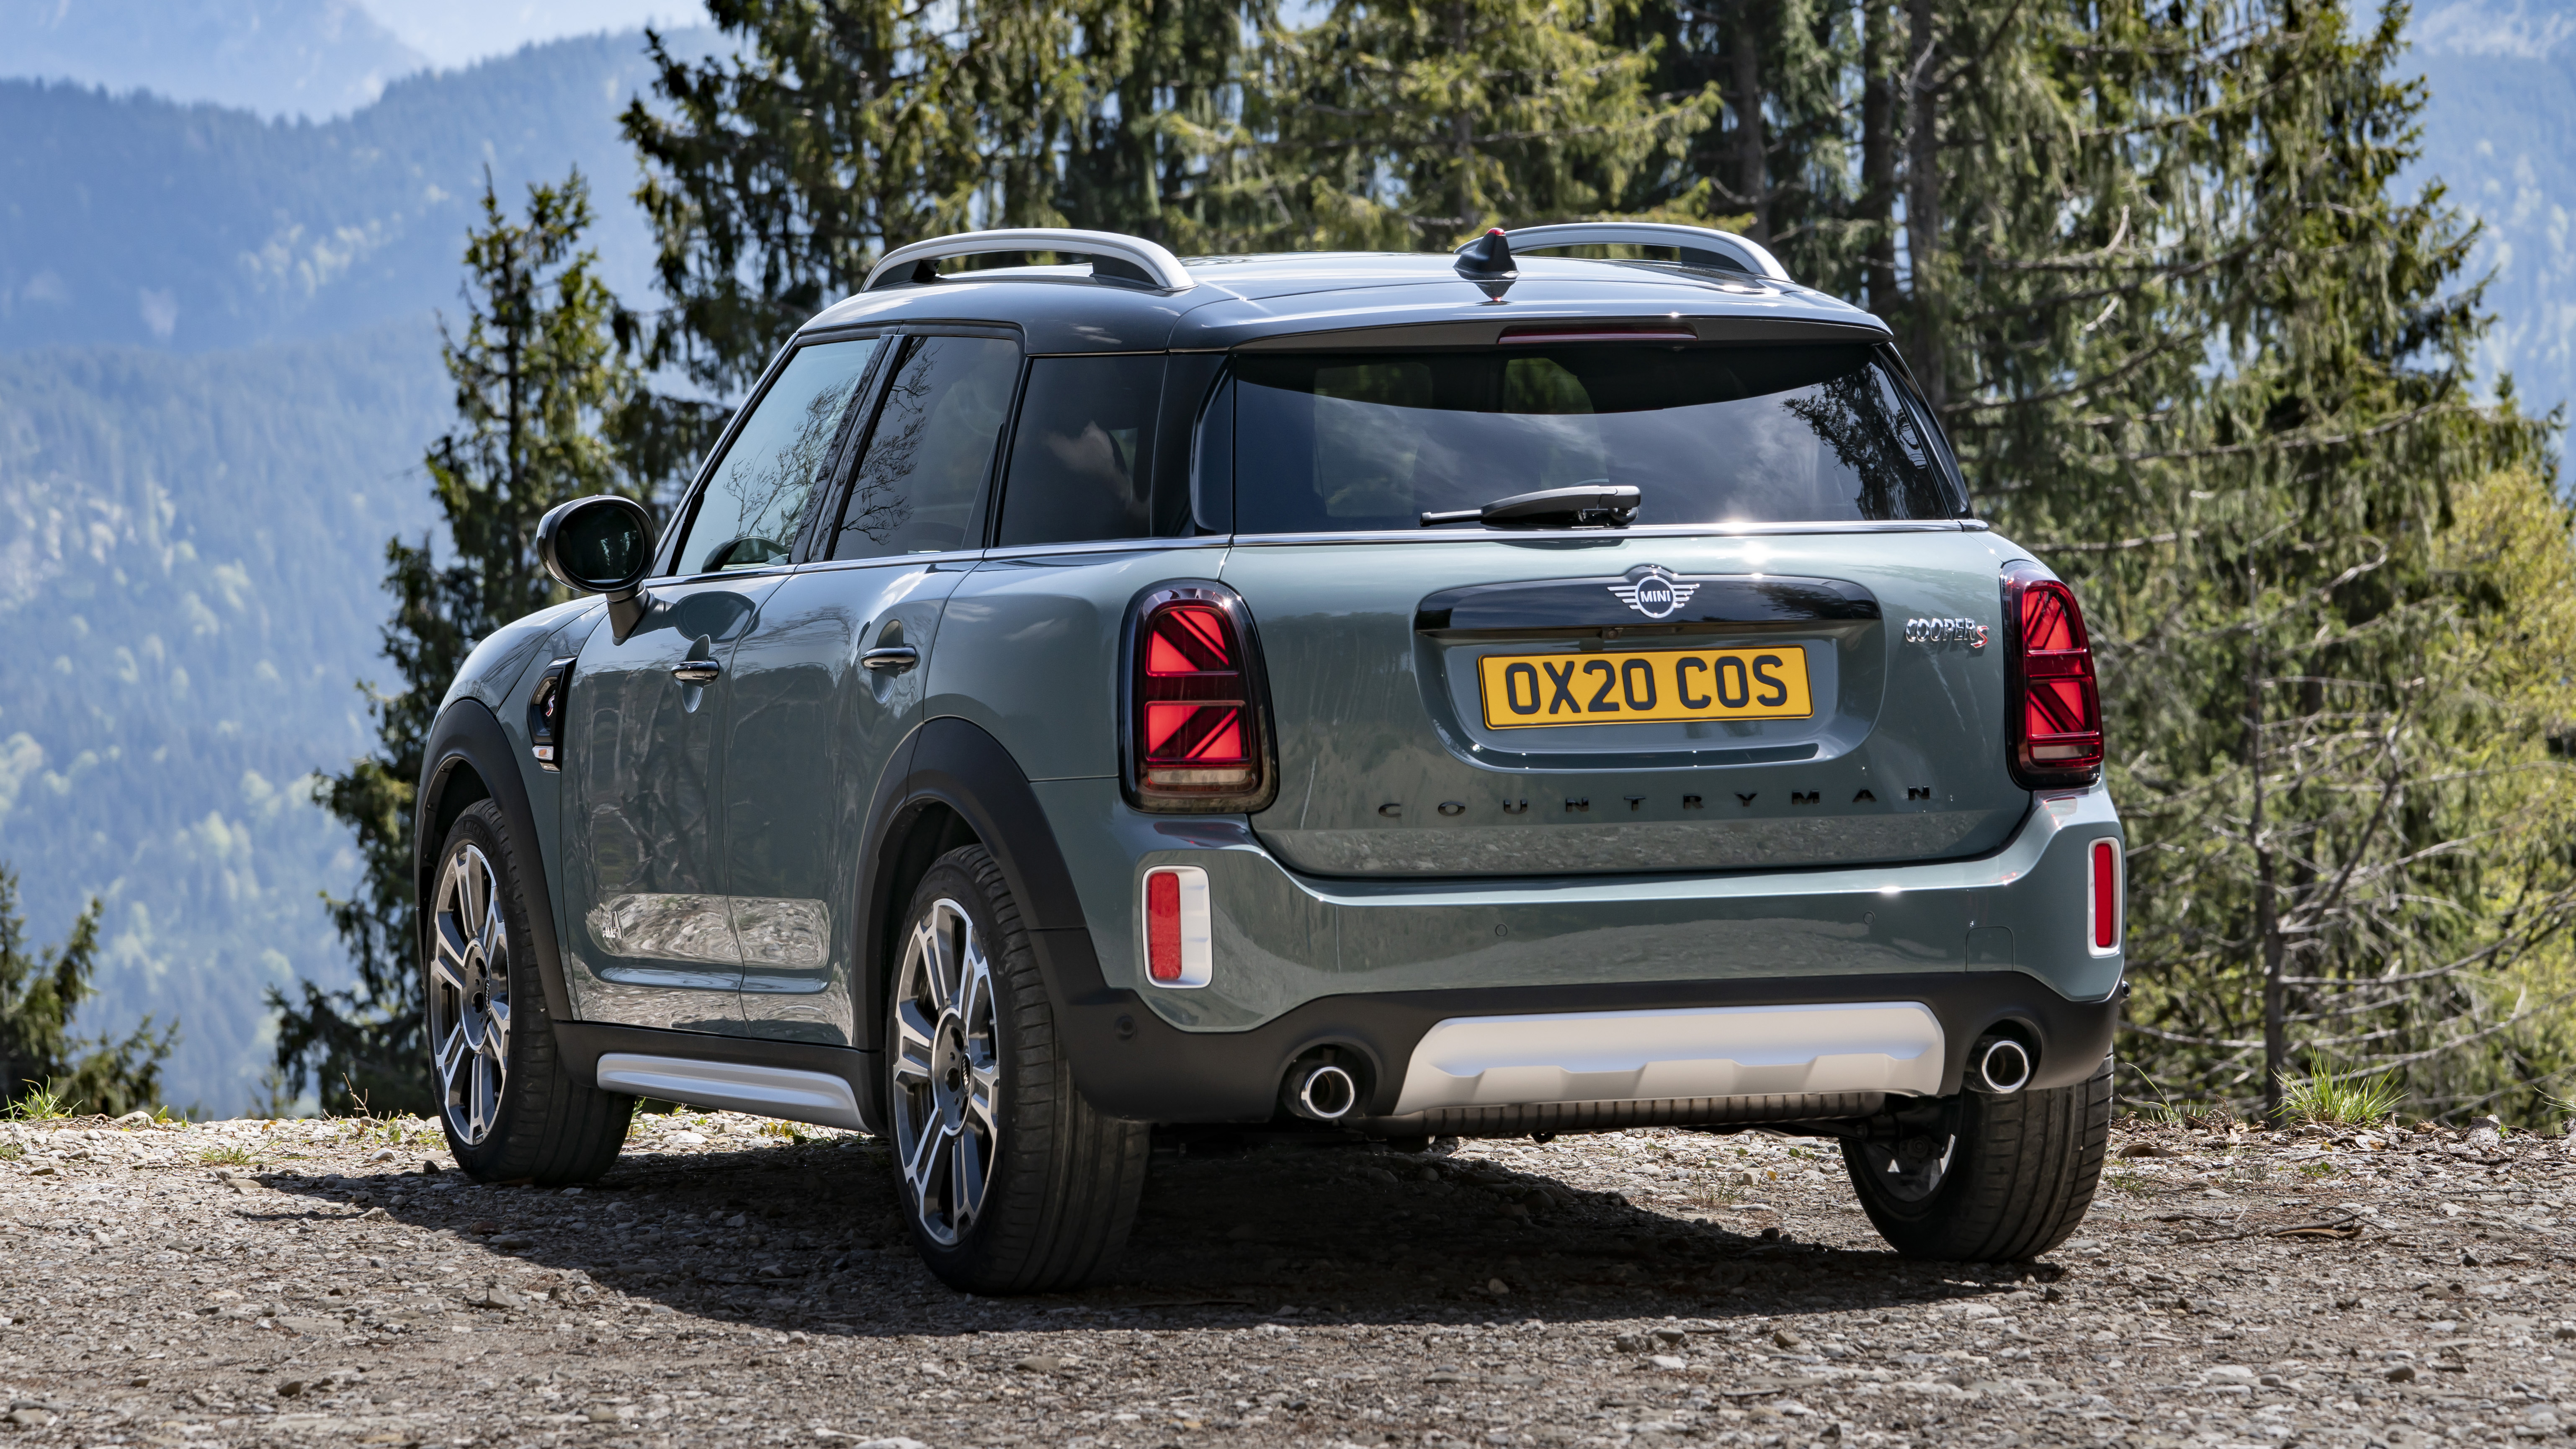 https://mediacloud.carbuyer.co.uk/image/private/s--dY7k9r-L--/v1631795399/carbuyer/2021/09/2020%20MINI%20Countryman-6.jpg